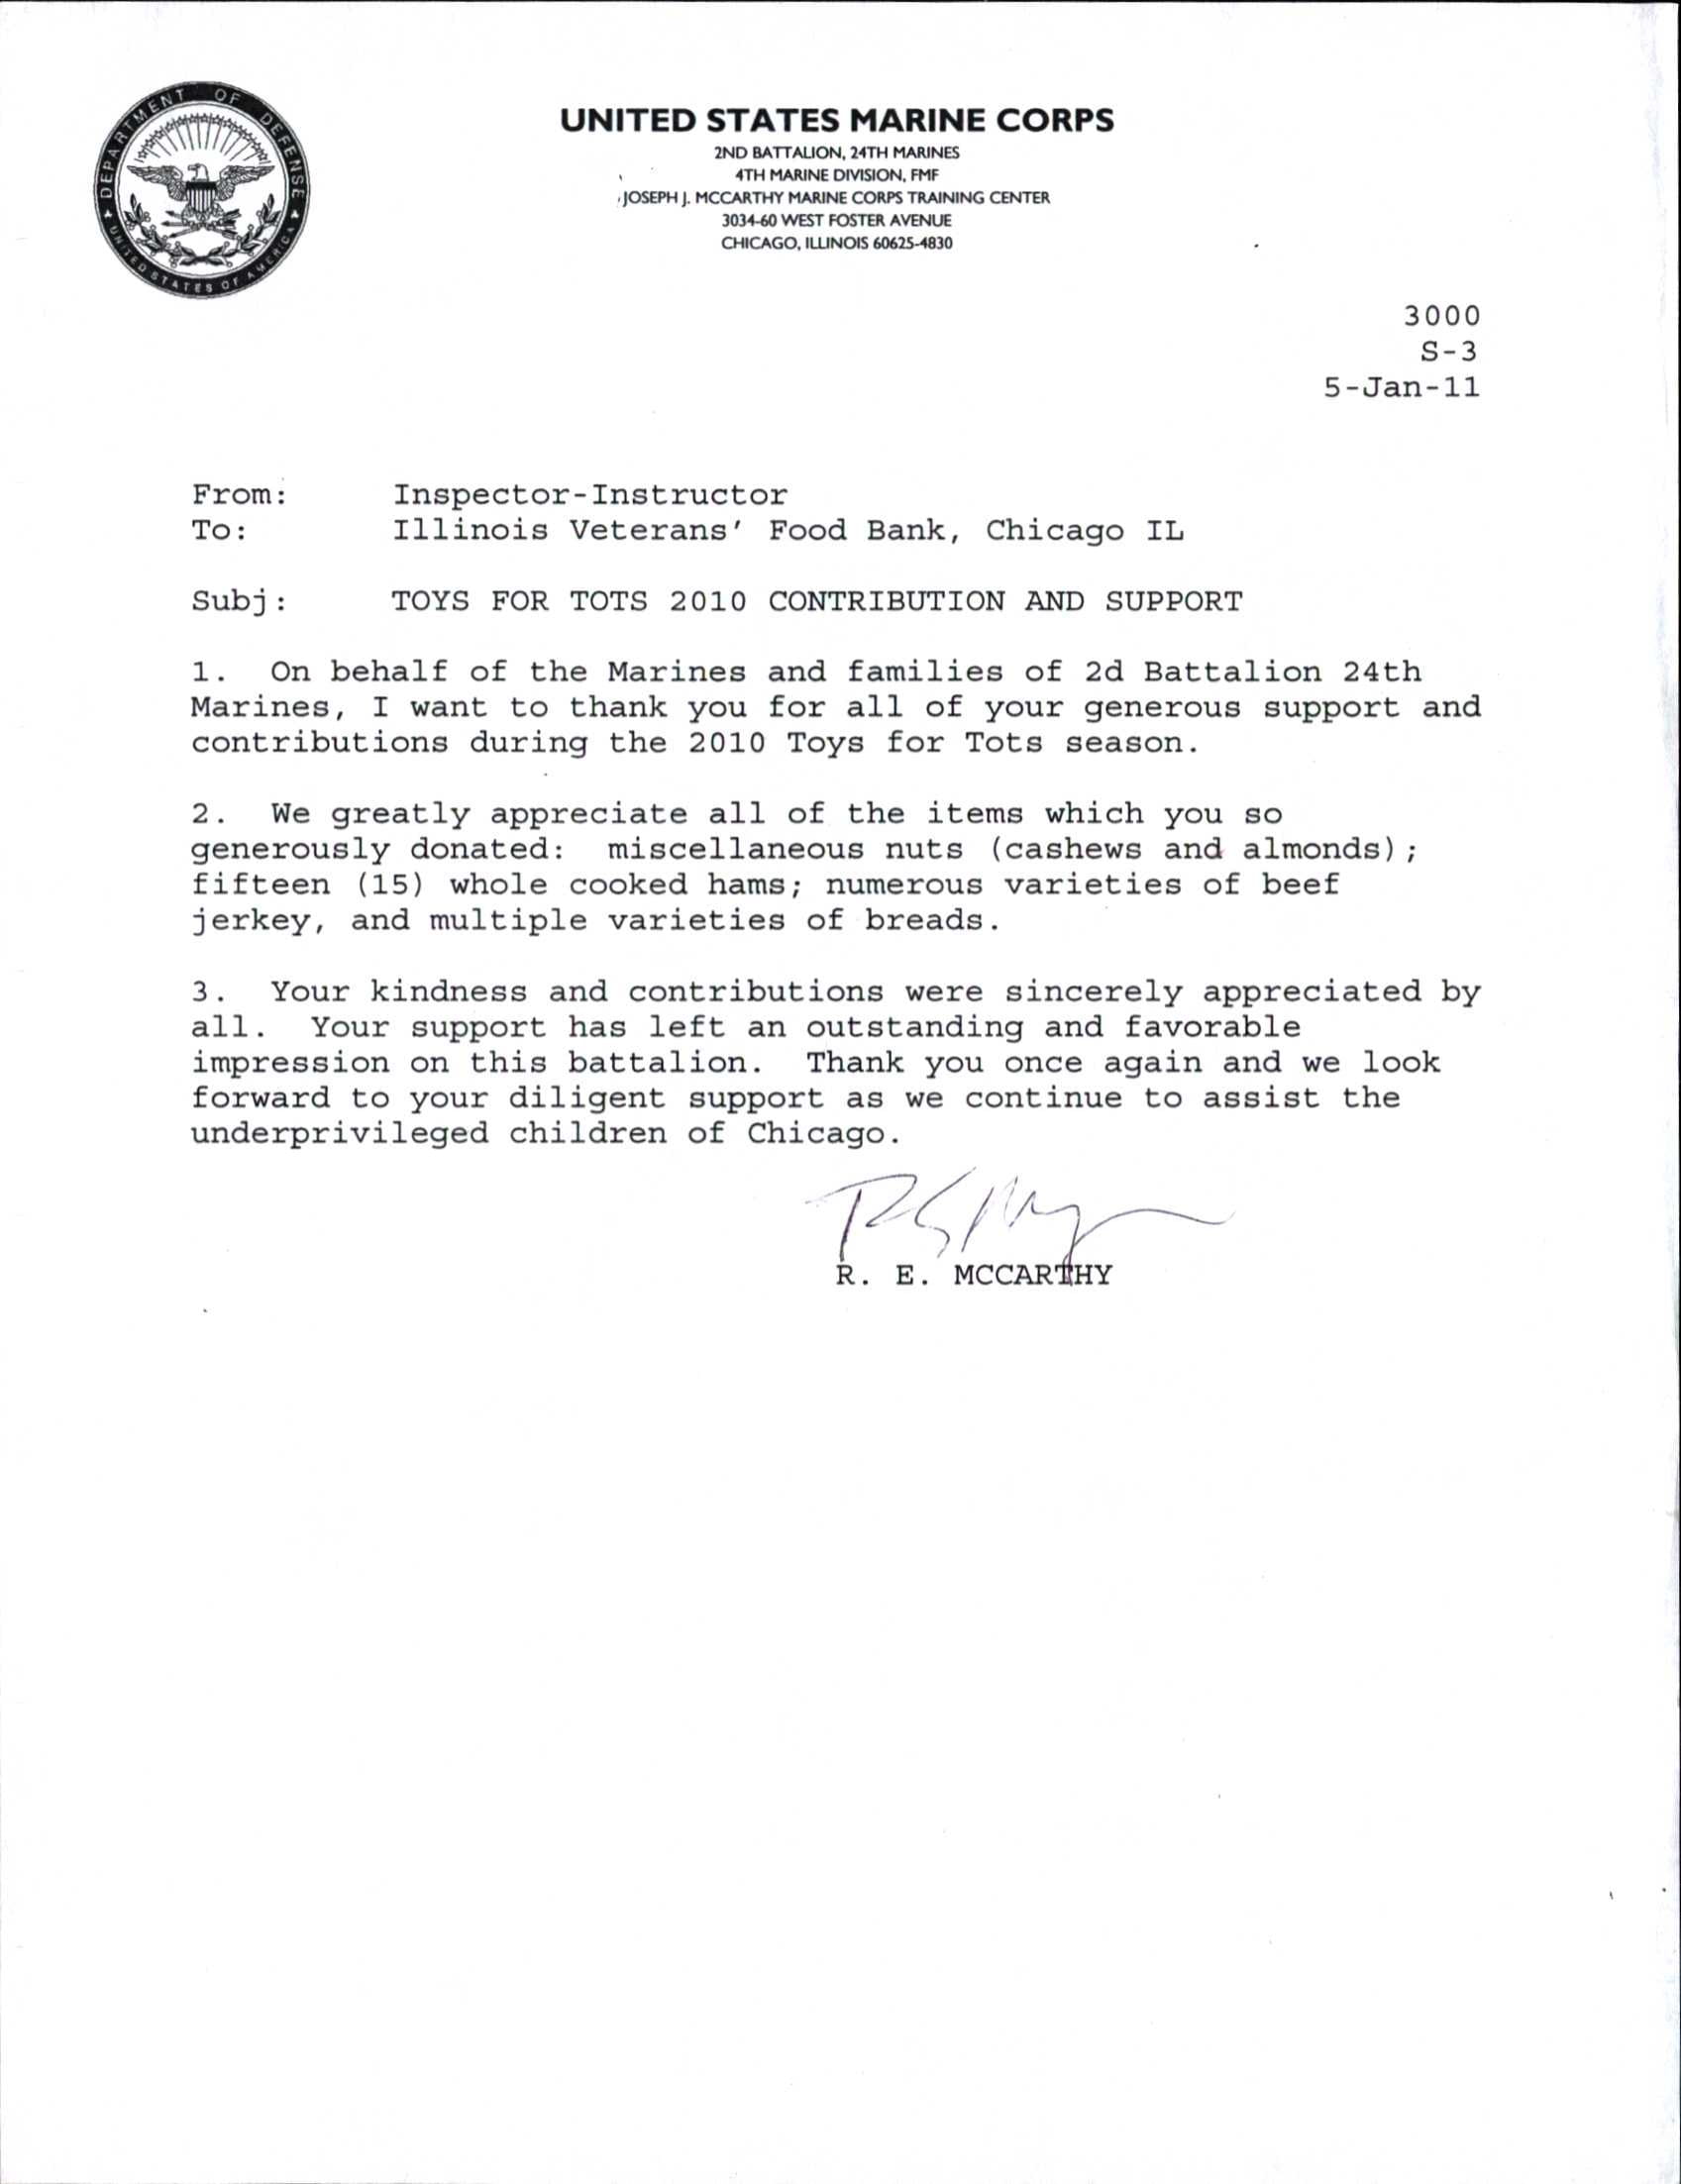 Letter of commendation from The Marine Corps